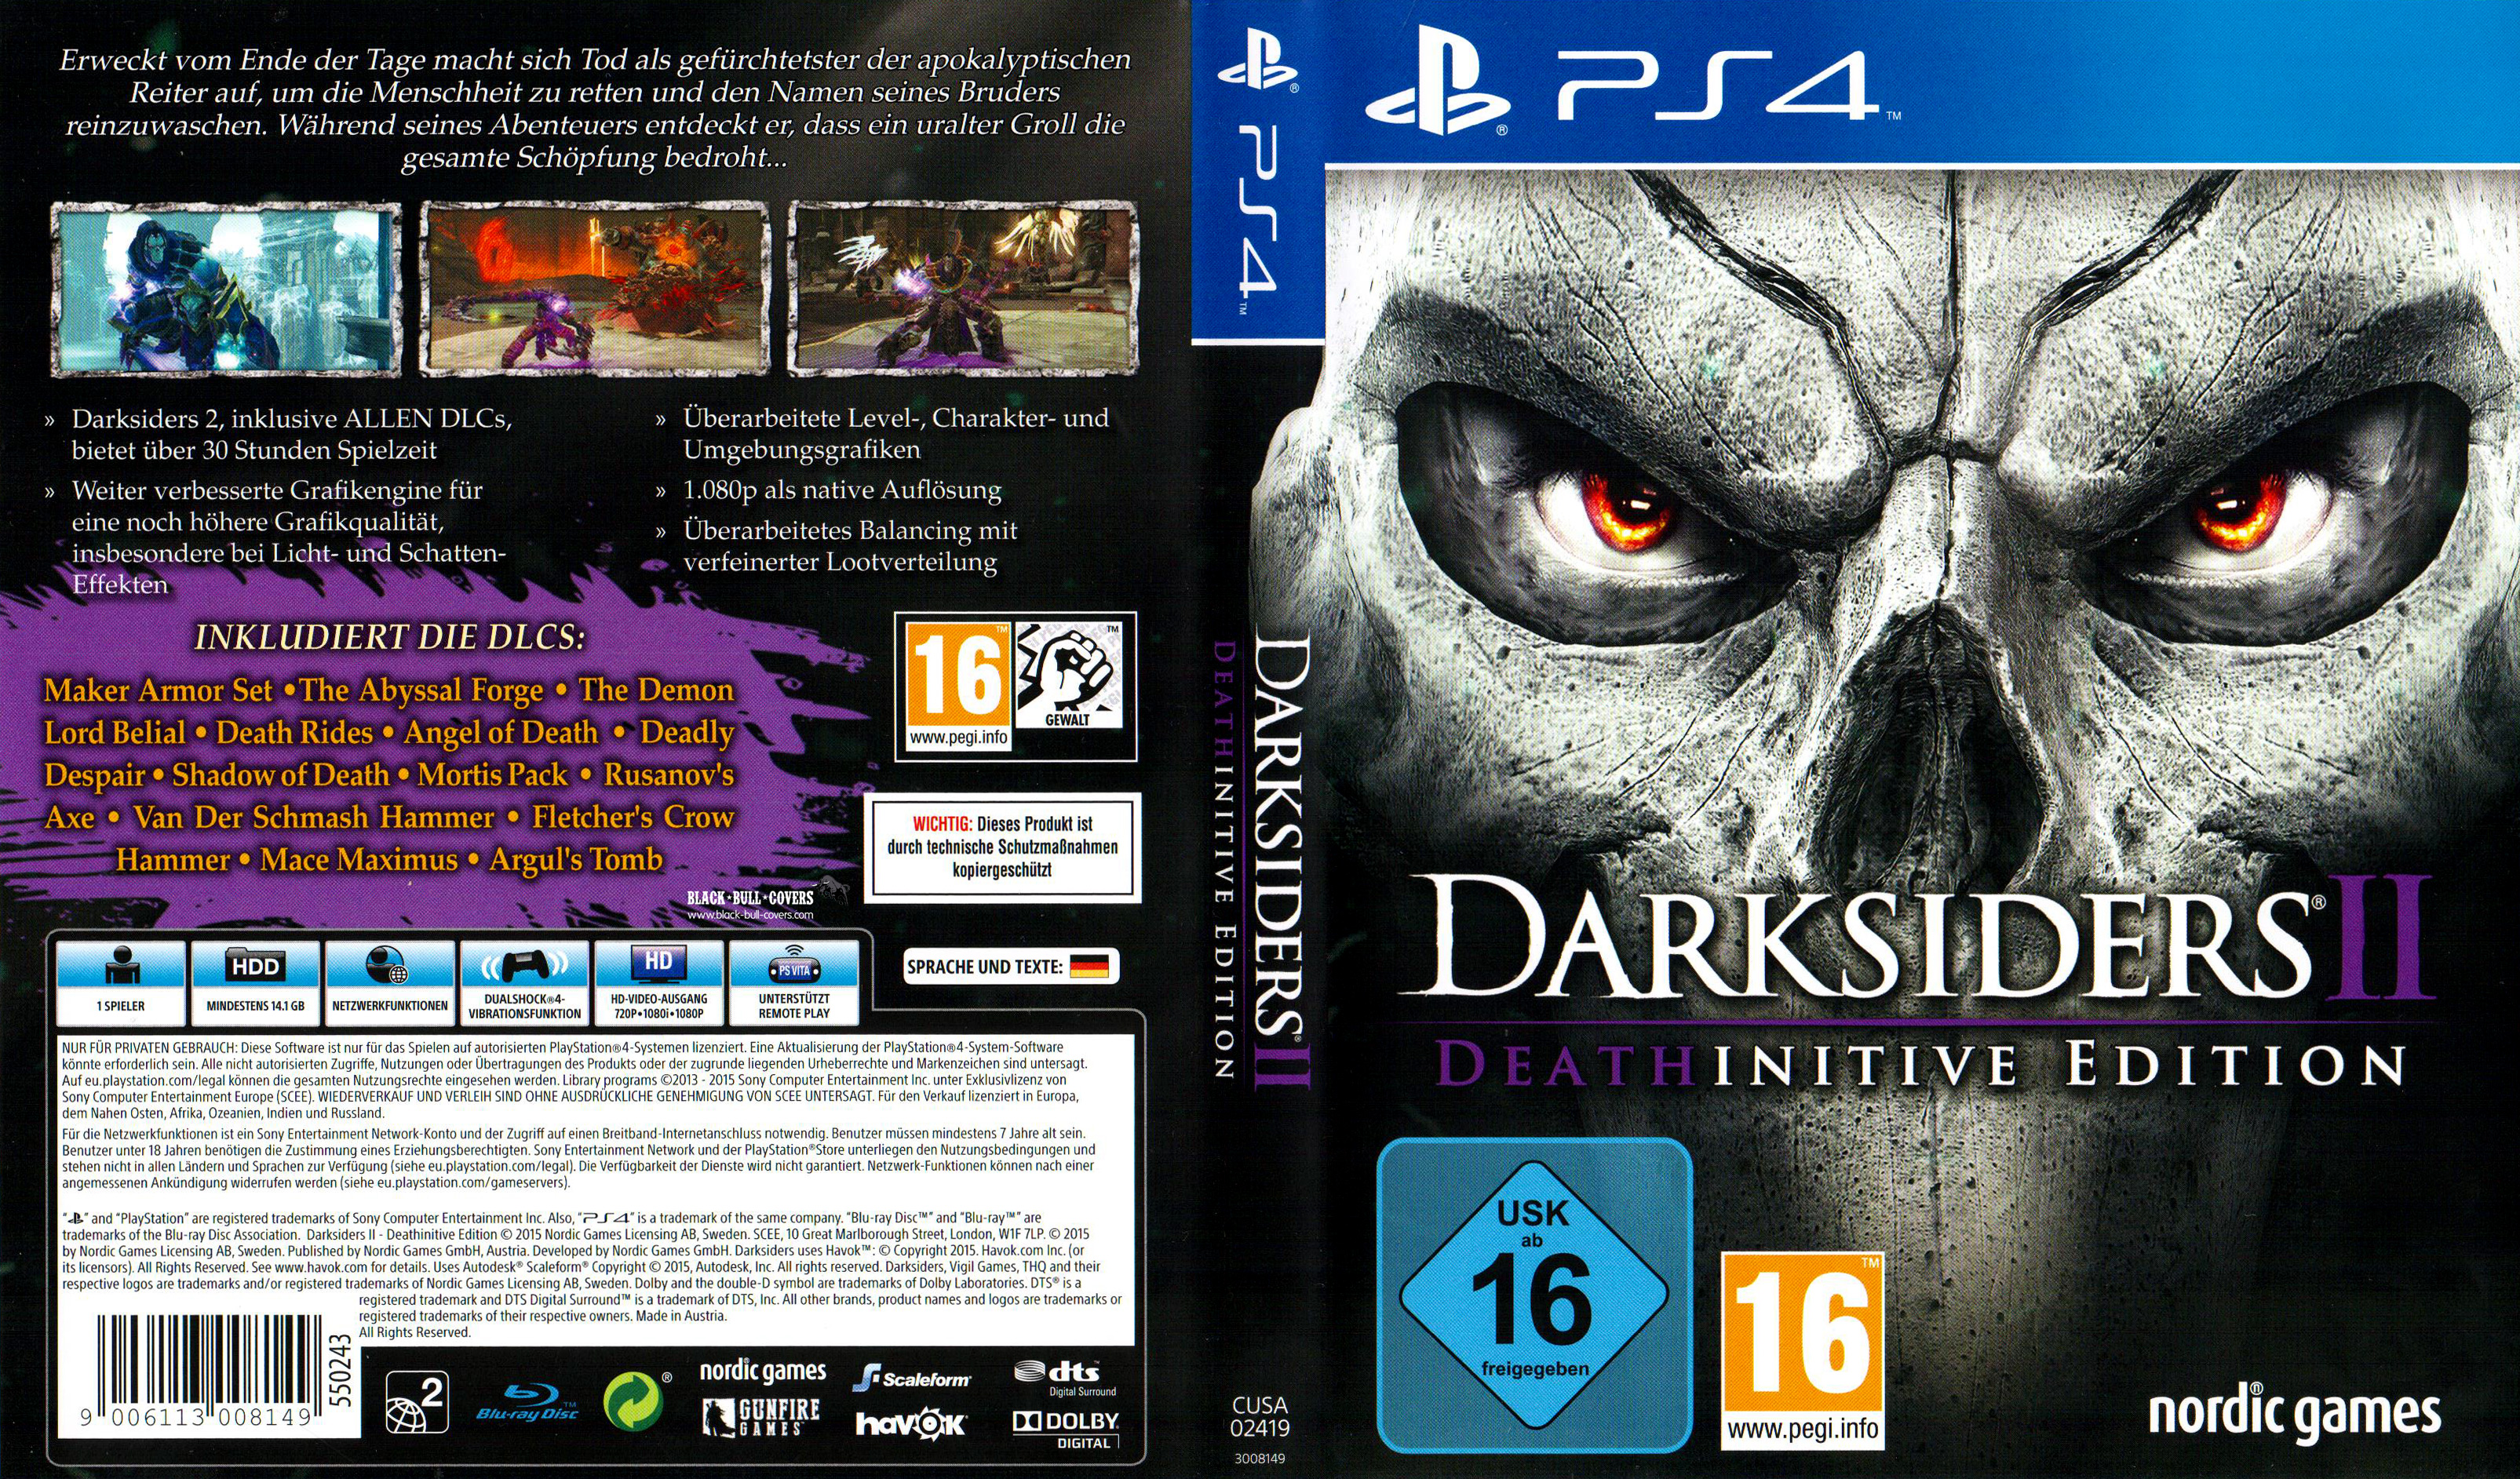 Darksiders 2 Deathinitive Edition Playstation 4 Covers Cover Century Over 500 000 Album Art Covers For Free